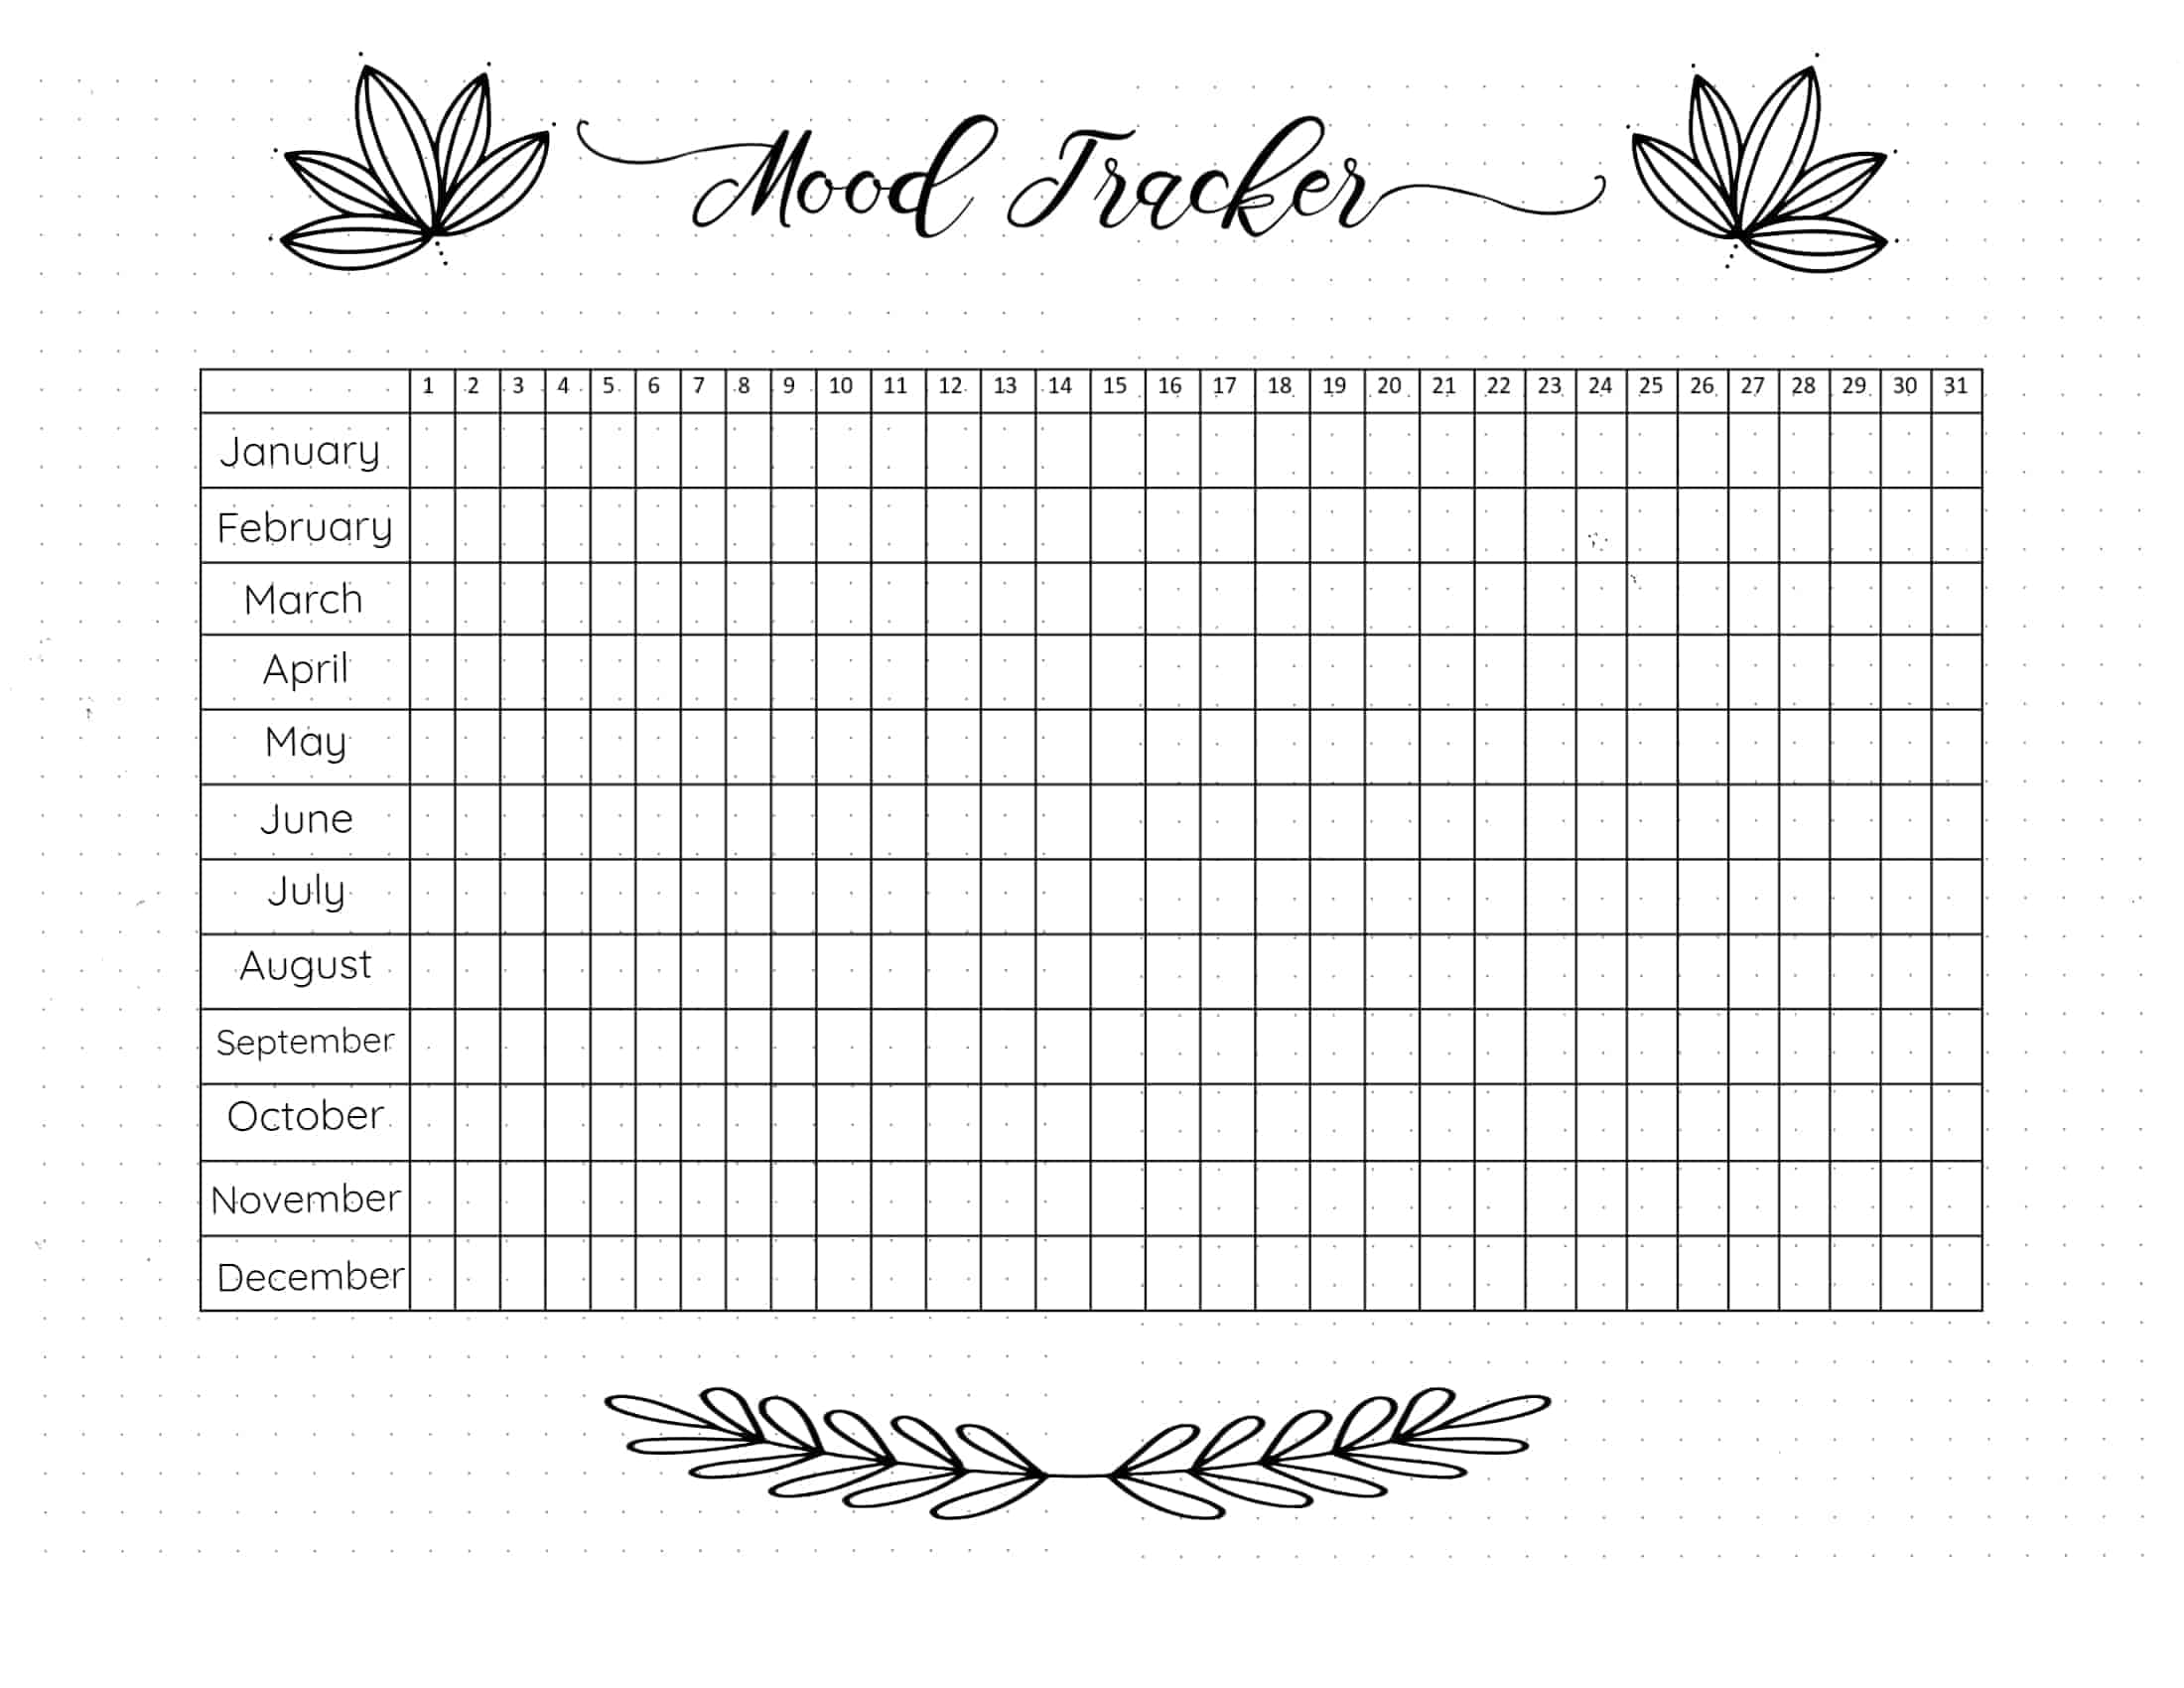 FREE Printable Mood Tracker Bullet Journal Classic Style 20 Templates